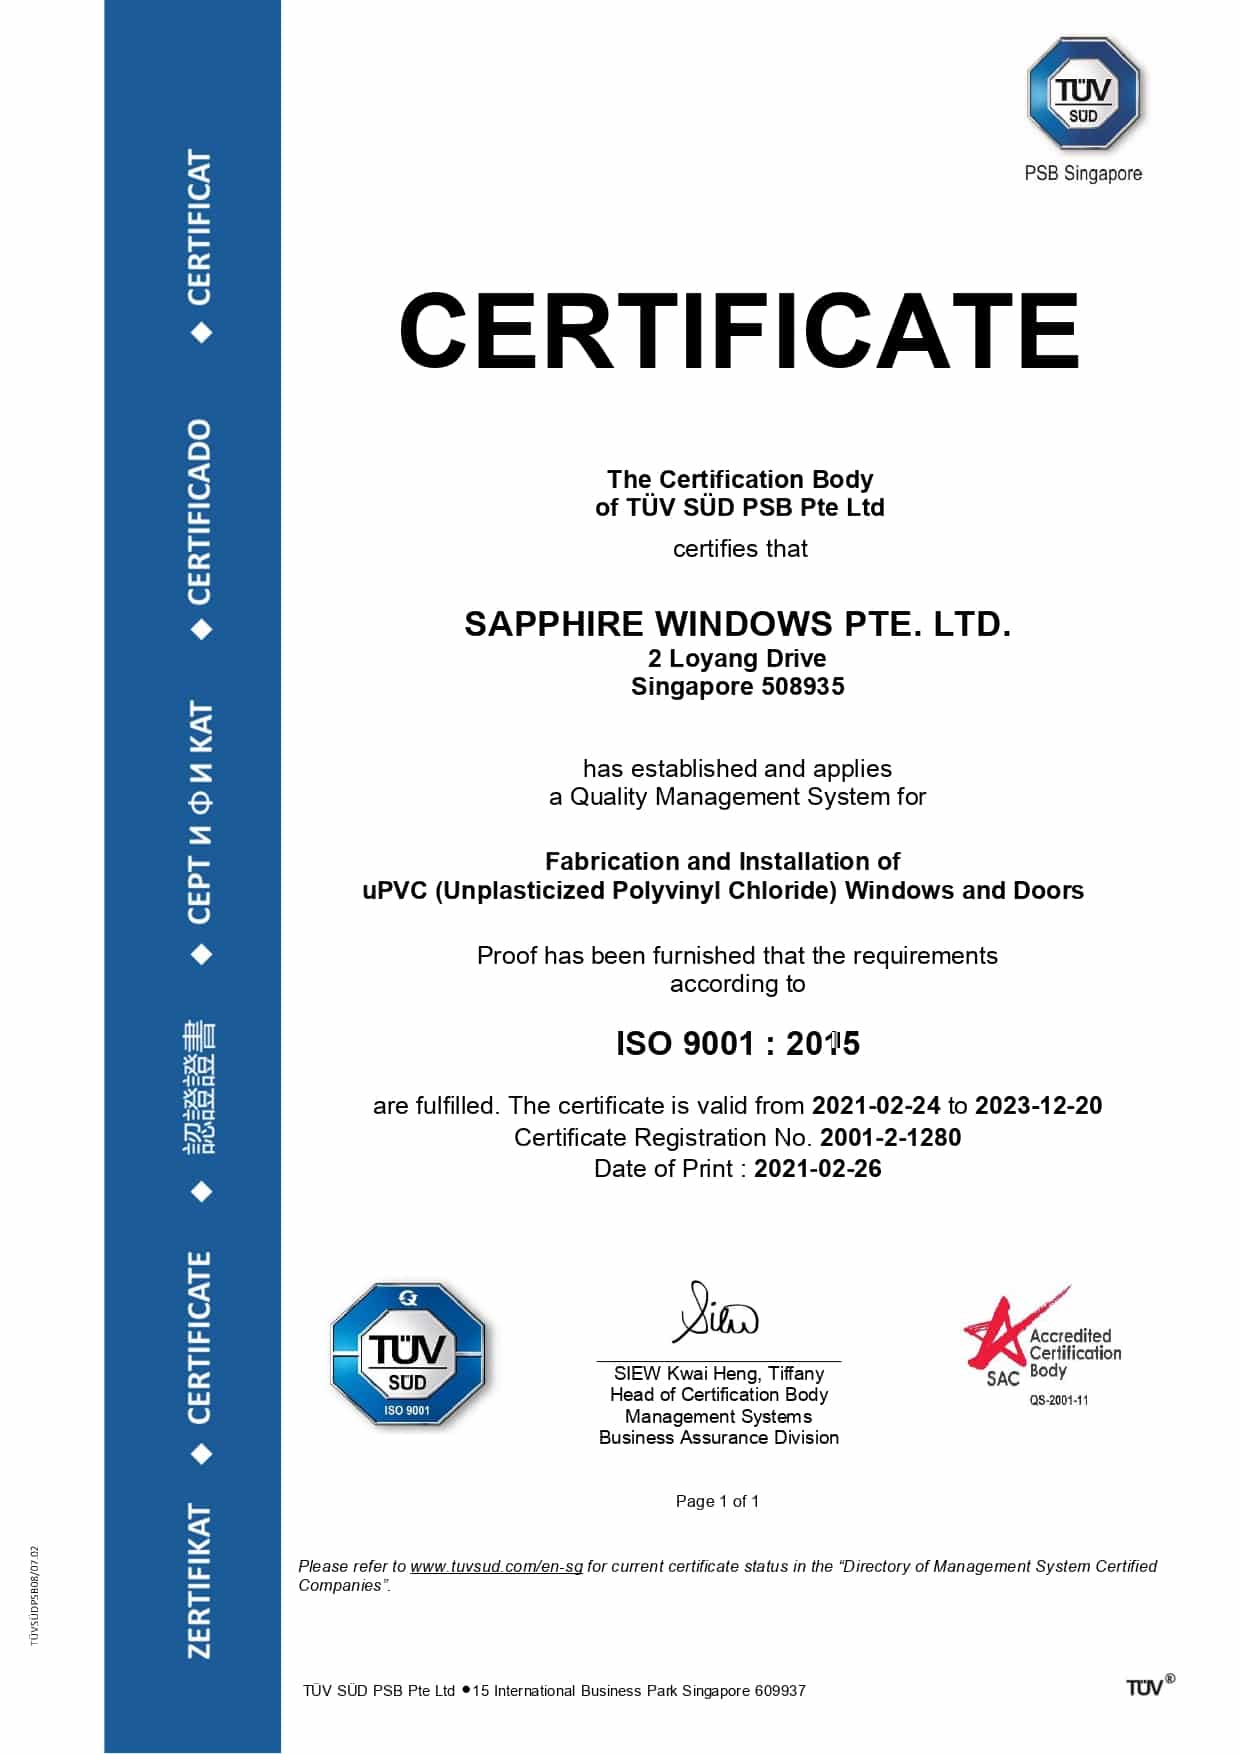 ISO 9001 : 2015 Certificate awarded to Sapphire Windows on 26 Feb 2021.